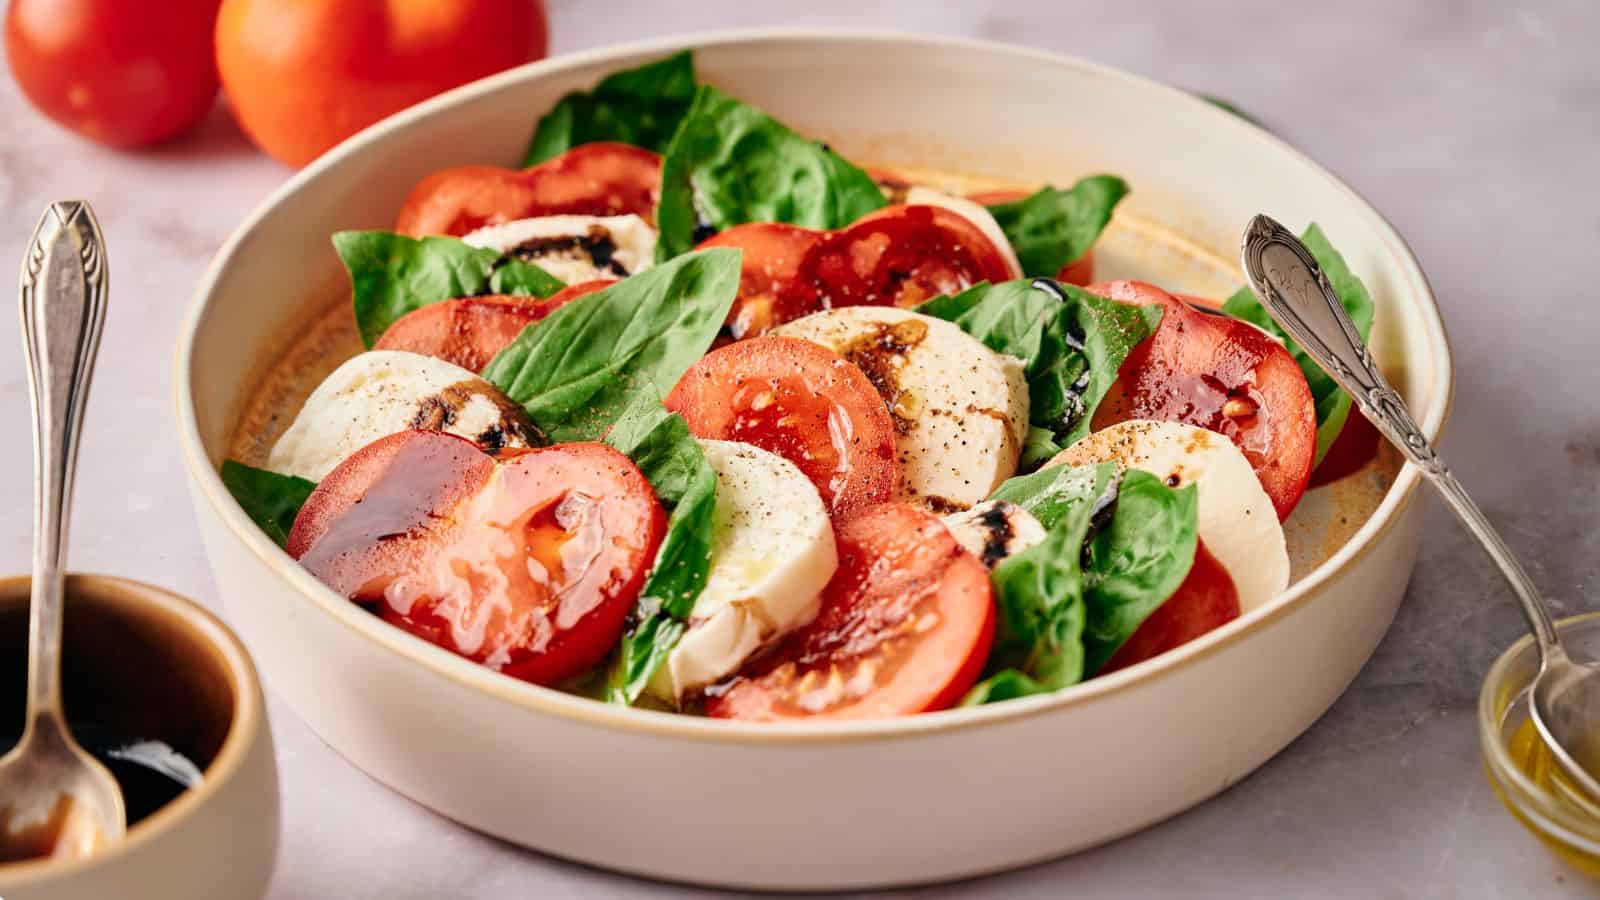 Caprese salad in a serving bowl, with tomatoes, oil and balsamic glaze nearby.